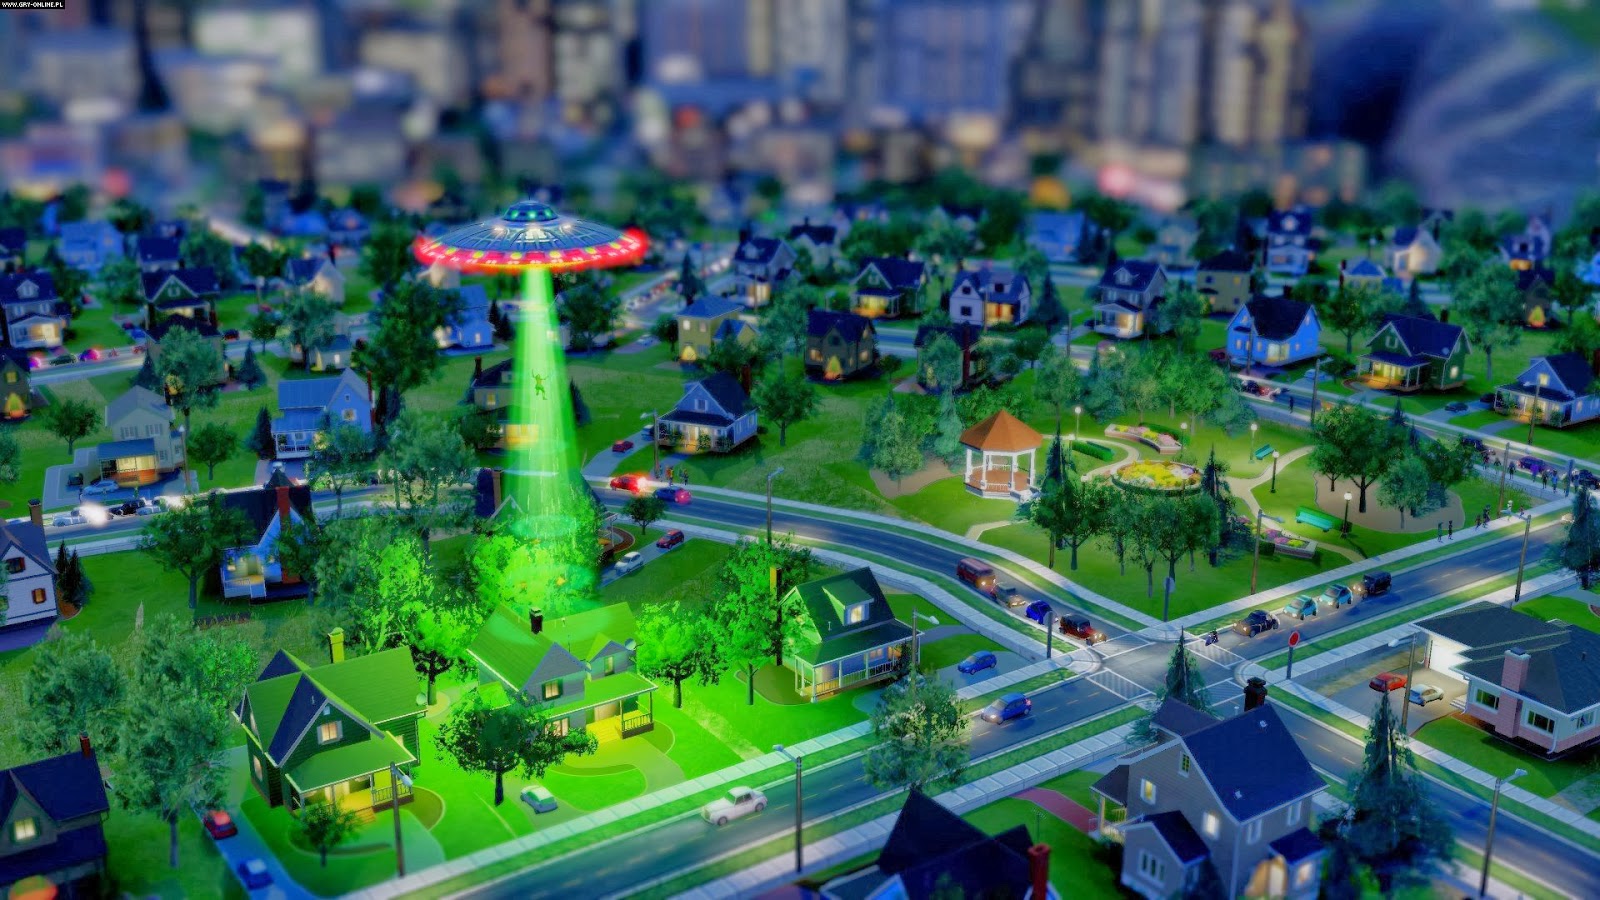 simcity pc game download